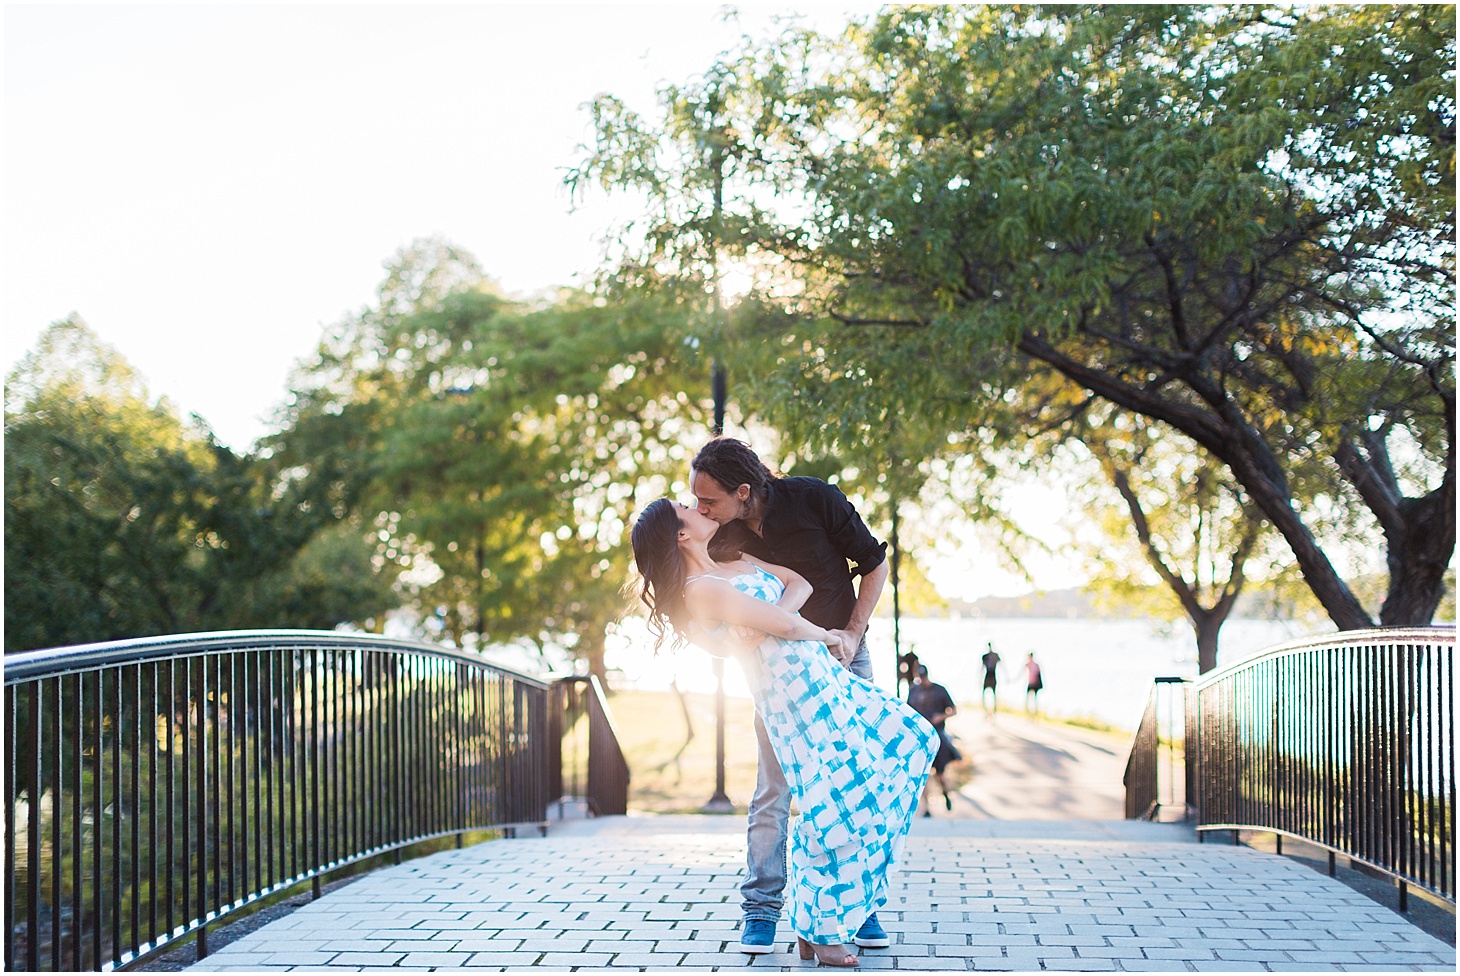 Engagement Portraits on the Charles River Esplanade | Sunset Engagement Session in Boston | Sarah Bradshaw Photography